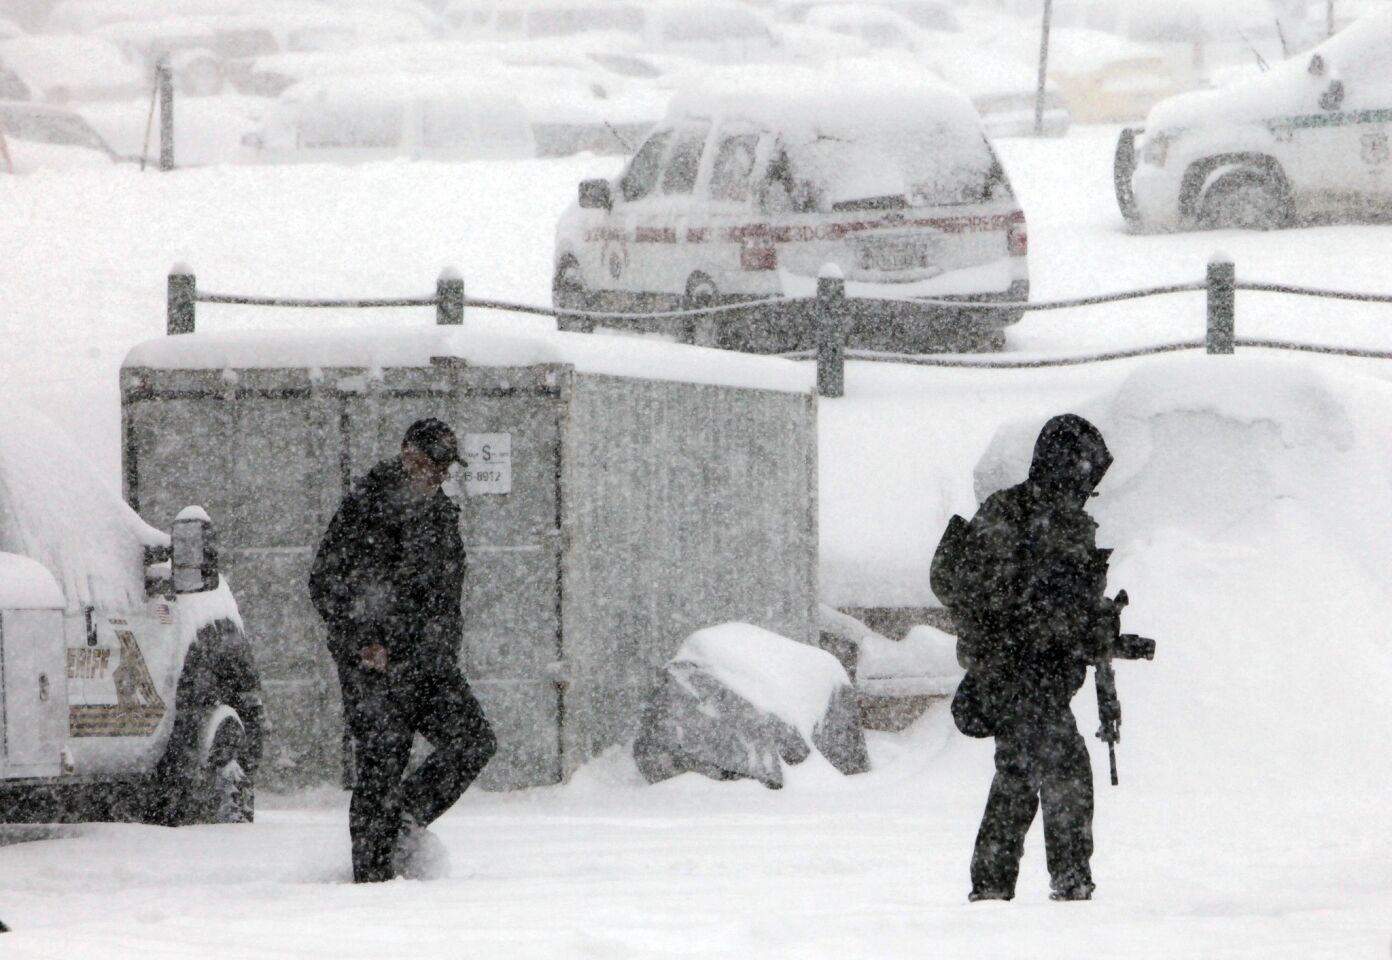 Police teams armed with assault rifles walk through falling snow at the San Bernadino County sheriff's command post at the base of Bear Mountain.